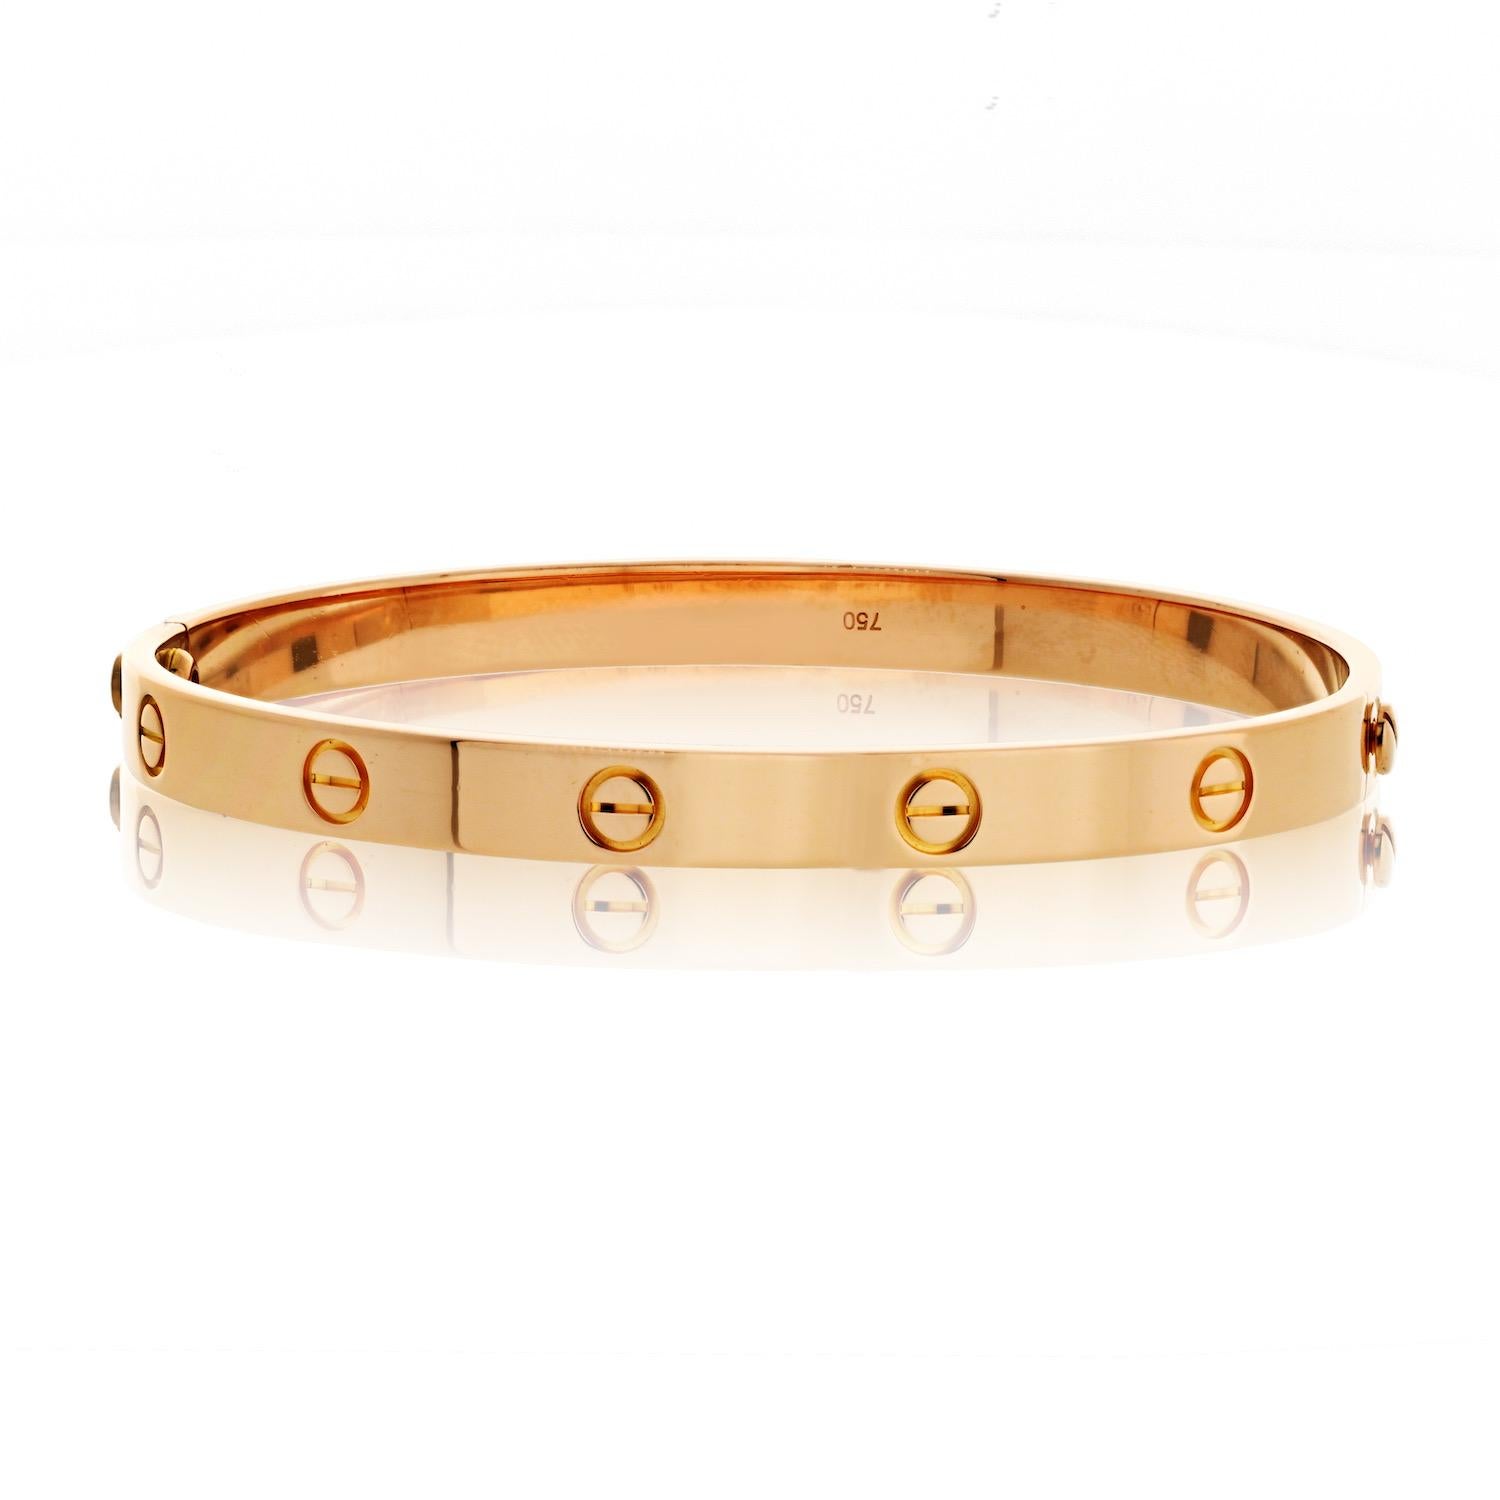 Cartier Love Bracelet.
Size 20. 
18K Rose Gold. 
In great condition. Old closing system. 
Included: Screwdriver, Cartier certificate.